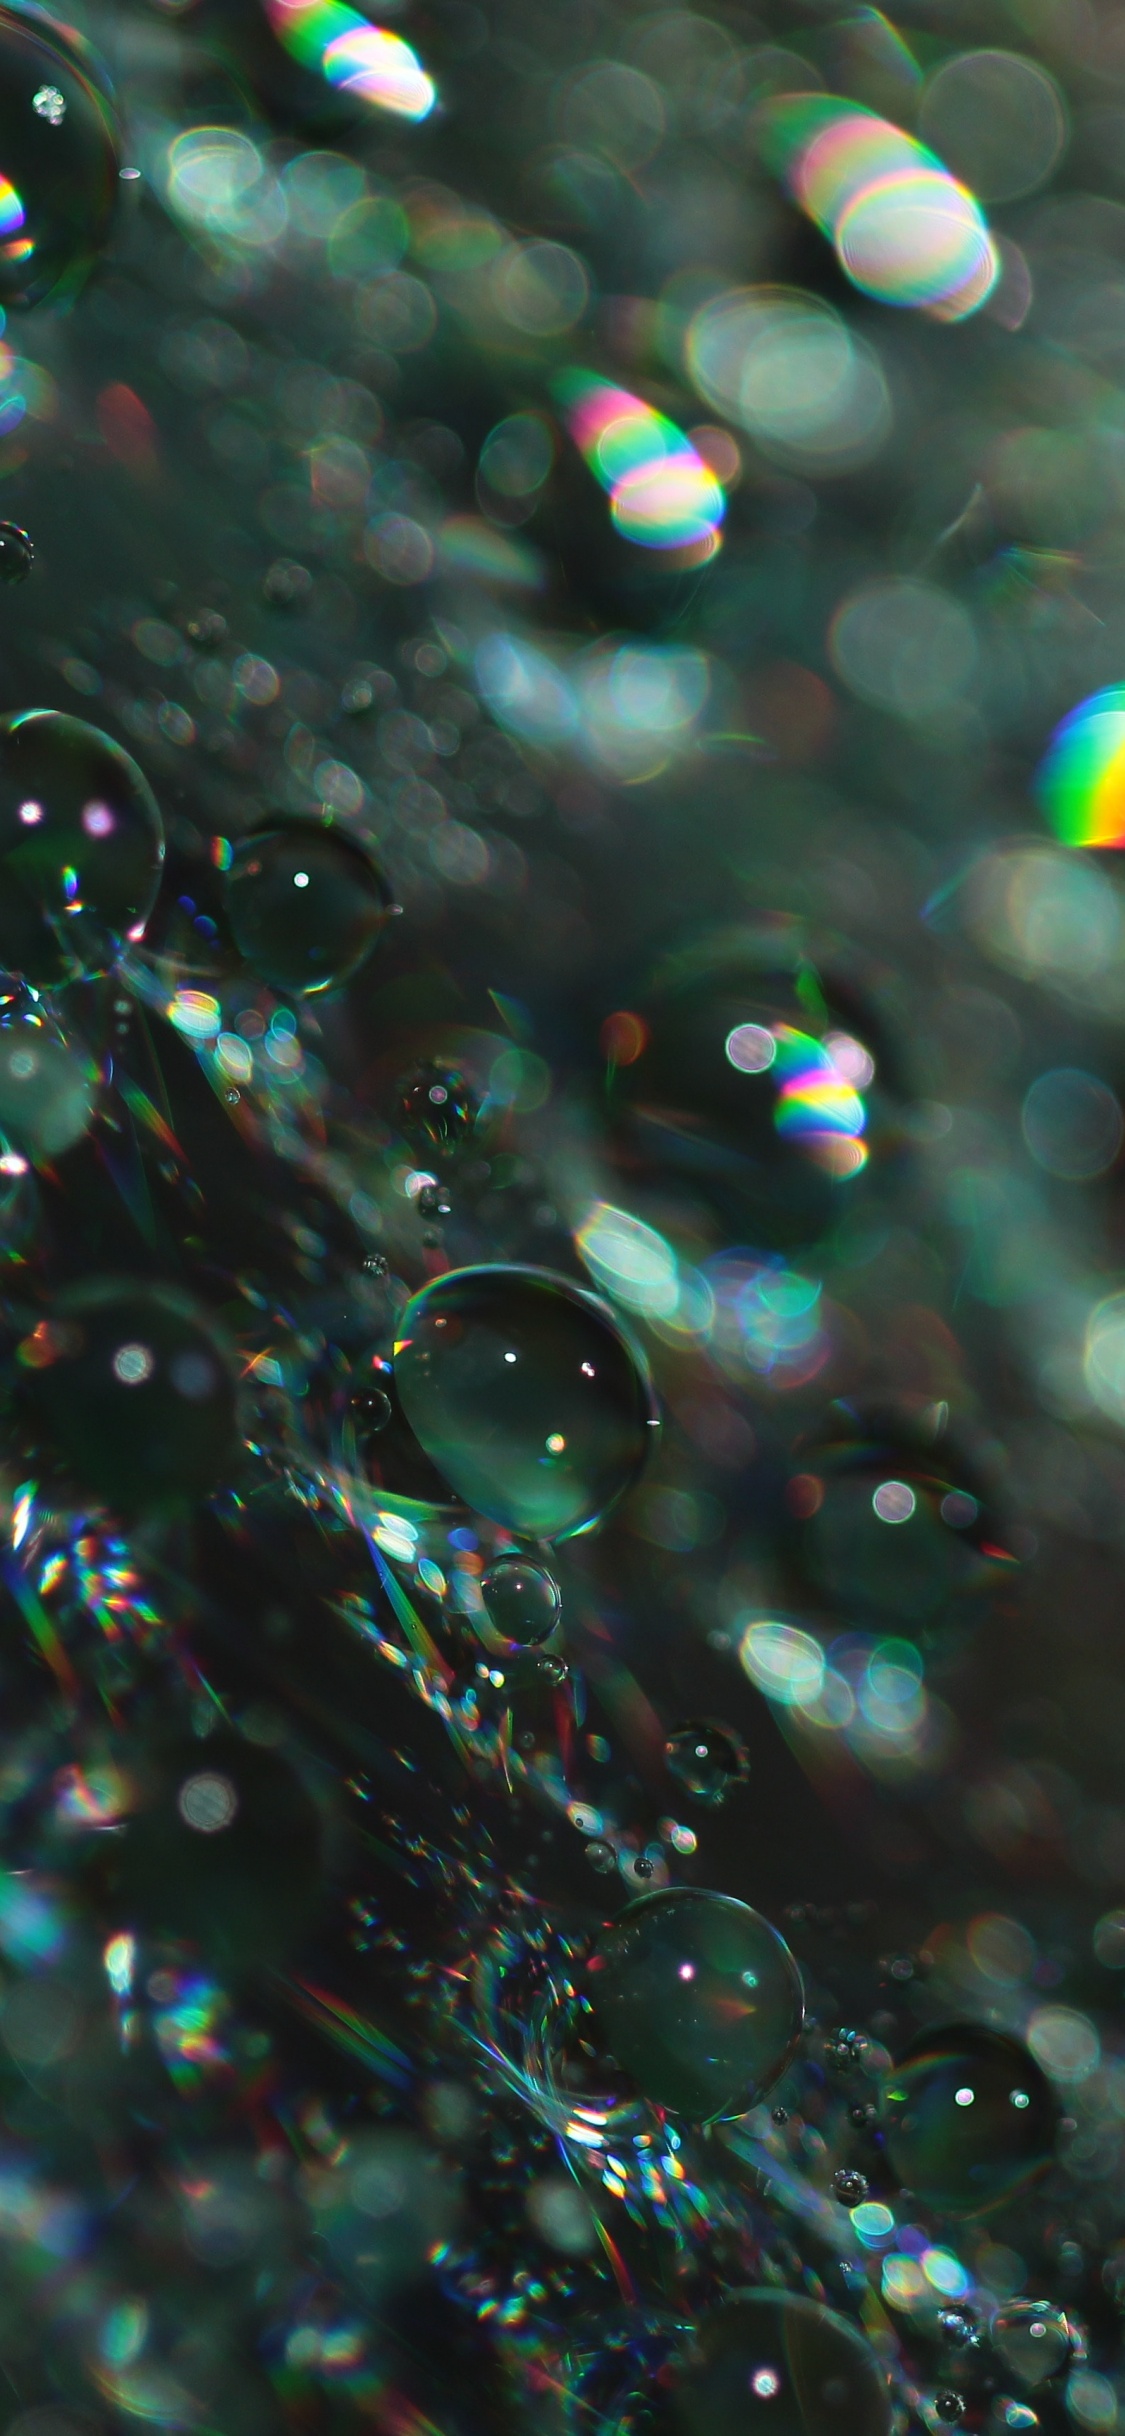 Water Droplets on Glass During Daytime. Wallpaper in 1125x2436 Resolution